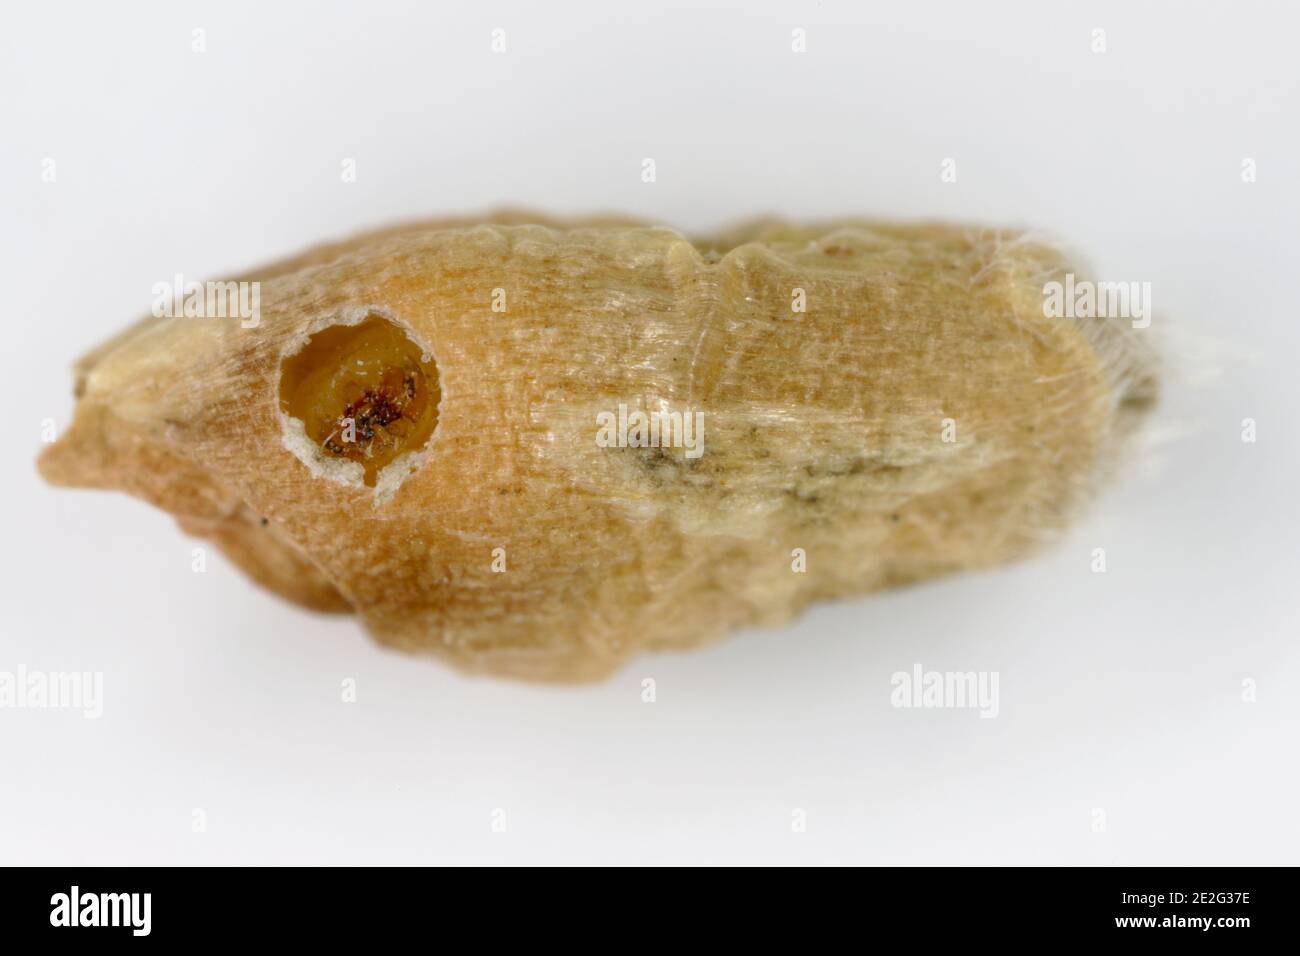 Grain damaged by the Angoumois grain moth (Sitotroga cerealella). It is an important pest of stored grains of cereals, maize, rice and others Stock Photo